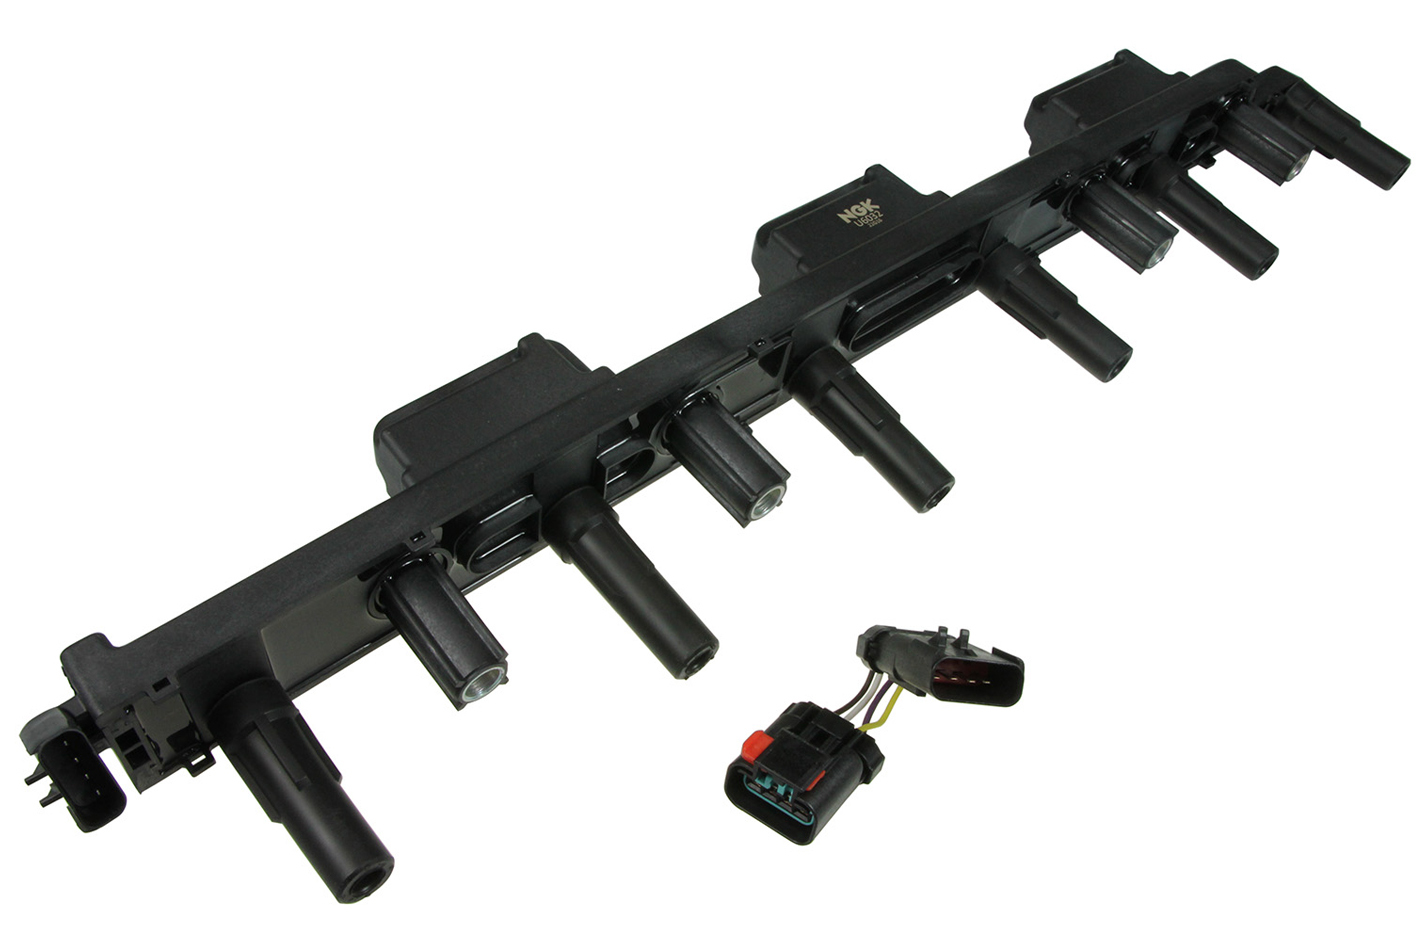 NGK U6032 Ignition Coil Pack, Coil-On-Plug Rail System, OE Specs, Black, Each